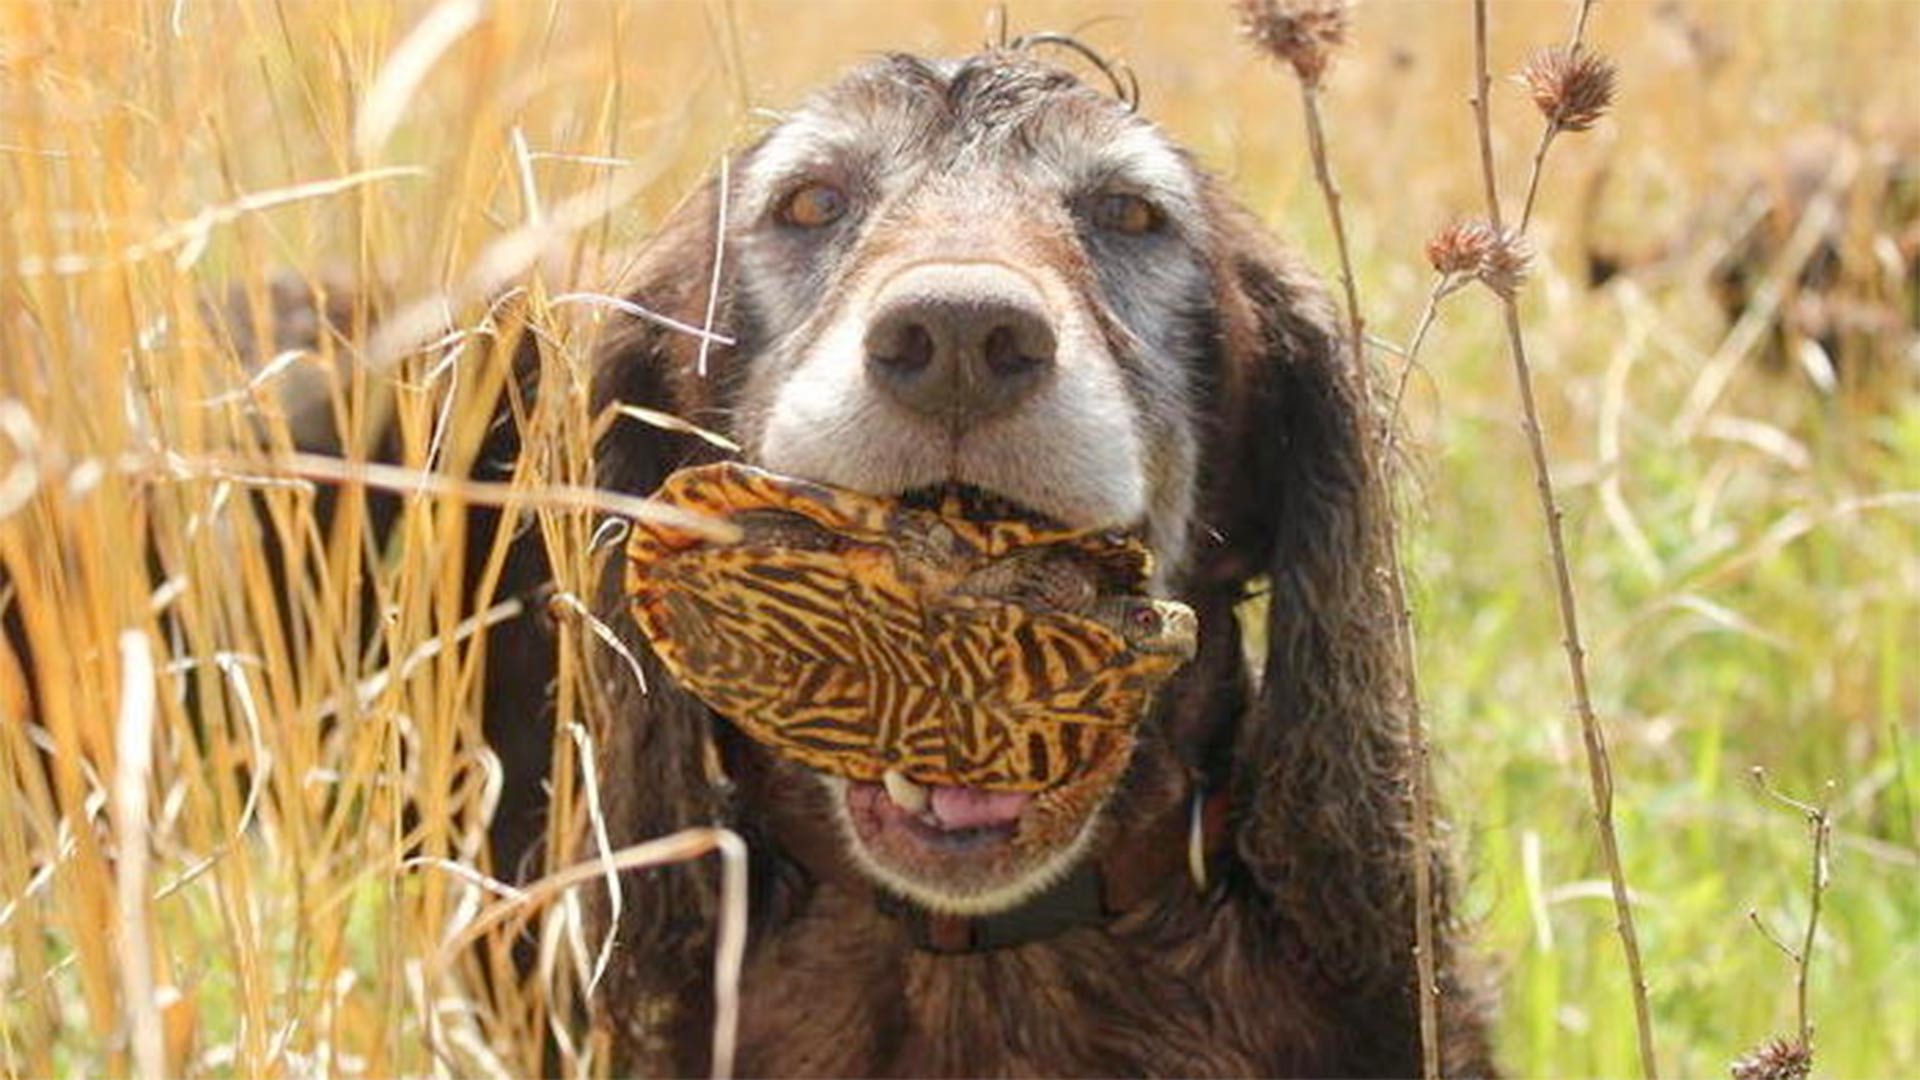 A team of specially trained hunting dogs has been helping conservationists and researchers find rare turtles in Iowa.